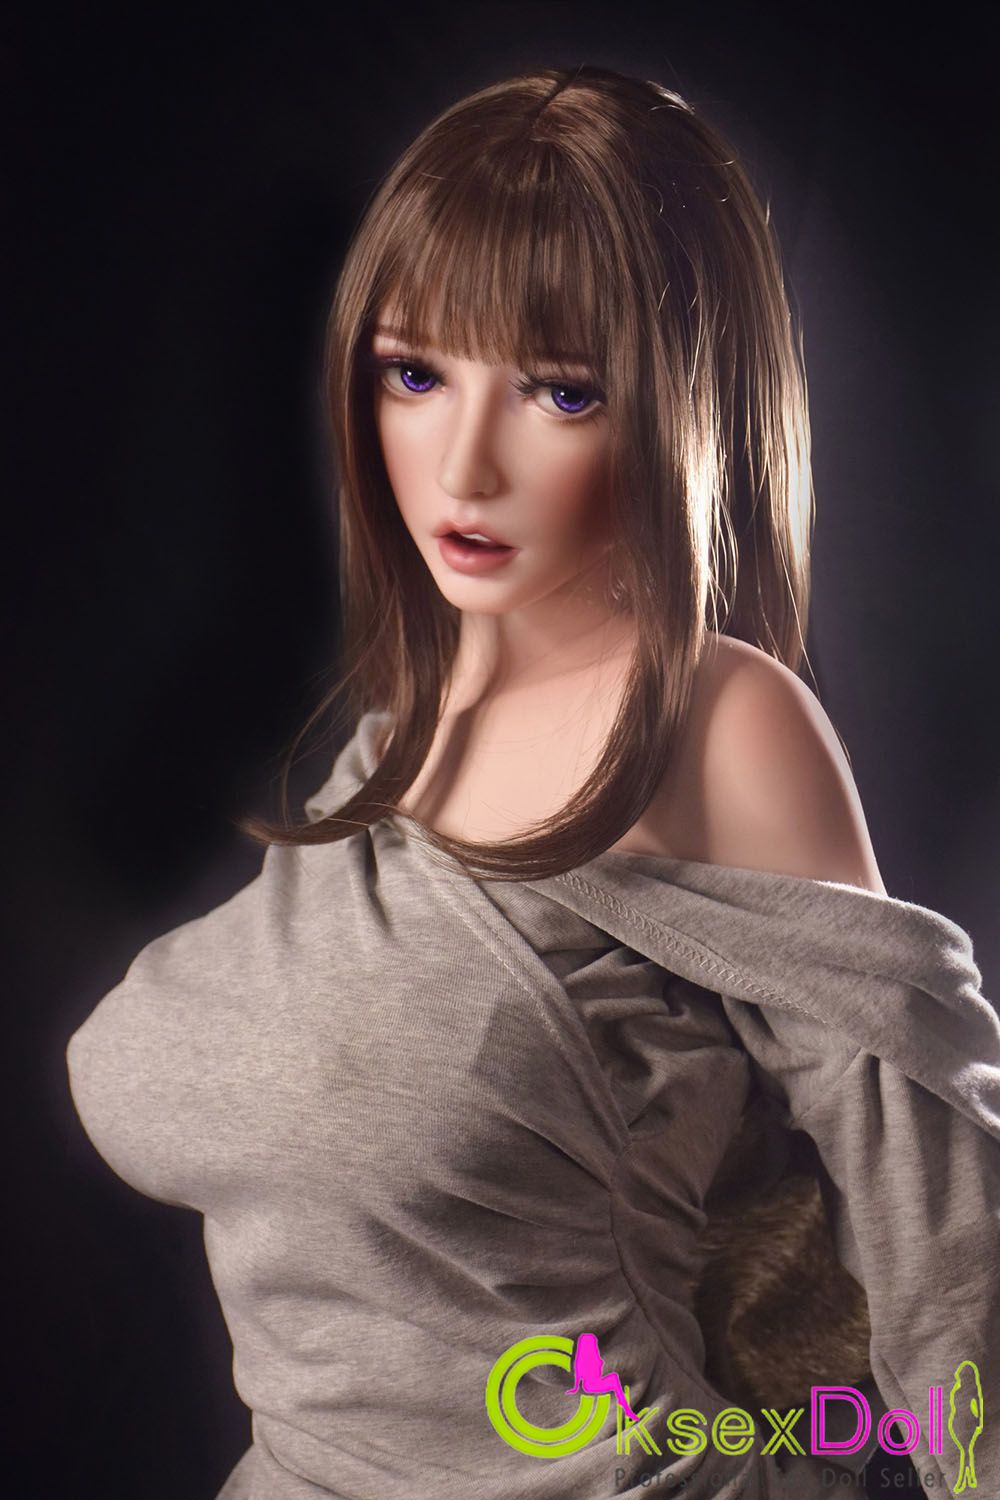 Young Beautiful Woman Sex Doll Gallery